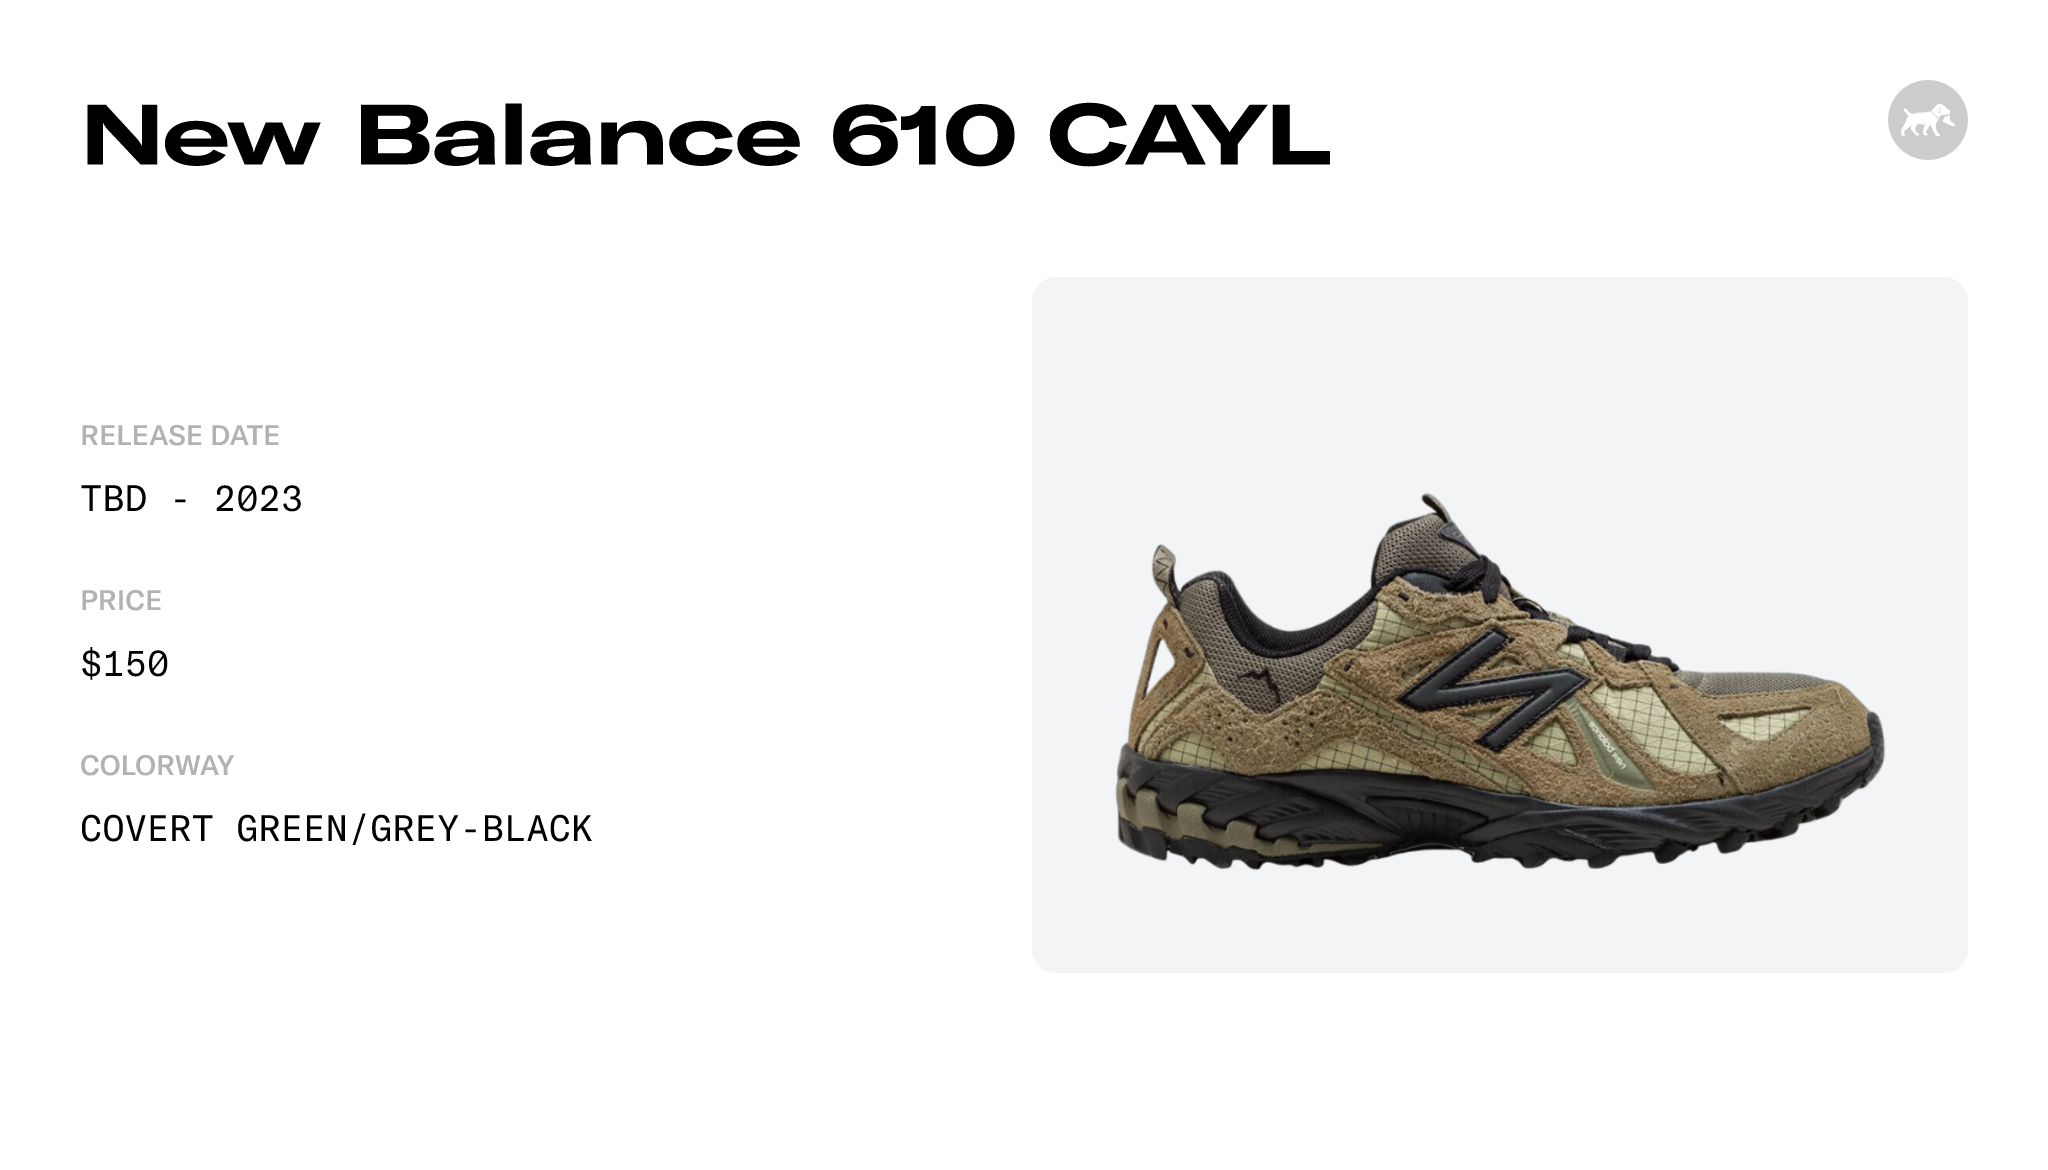 The CAYL x New Balance Collection Releases October 13